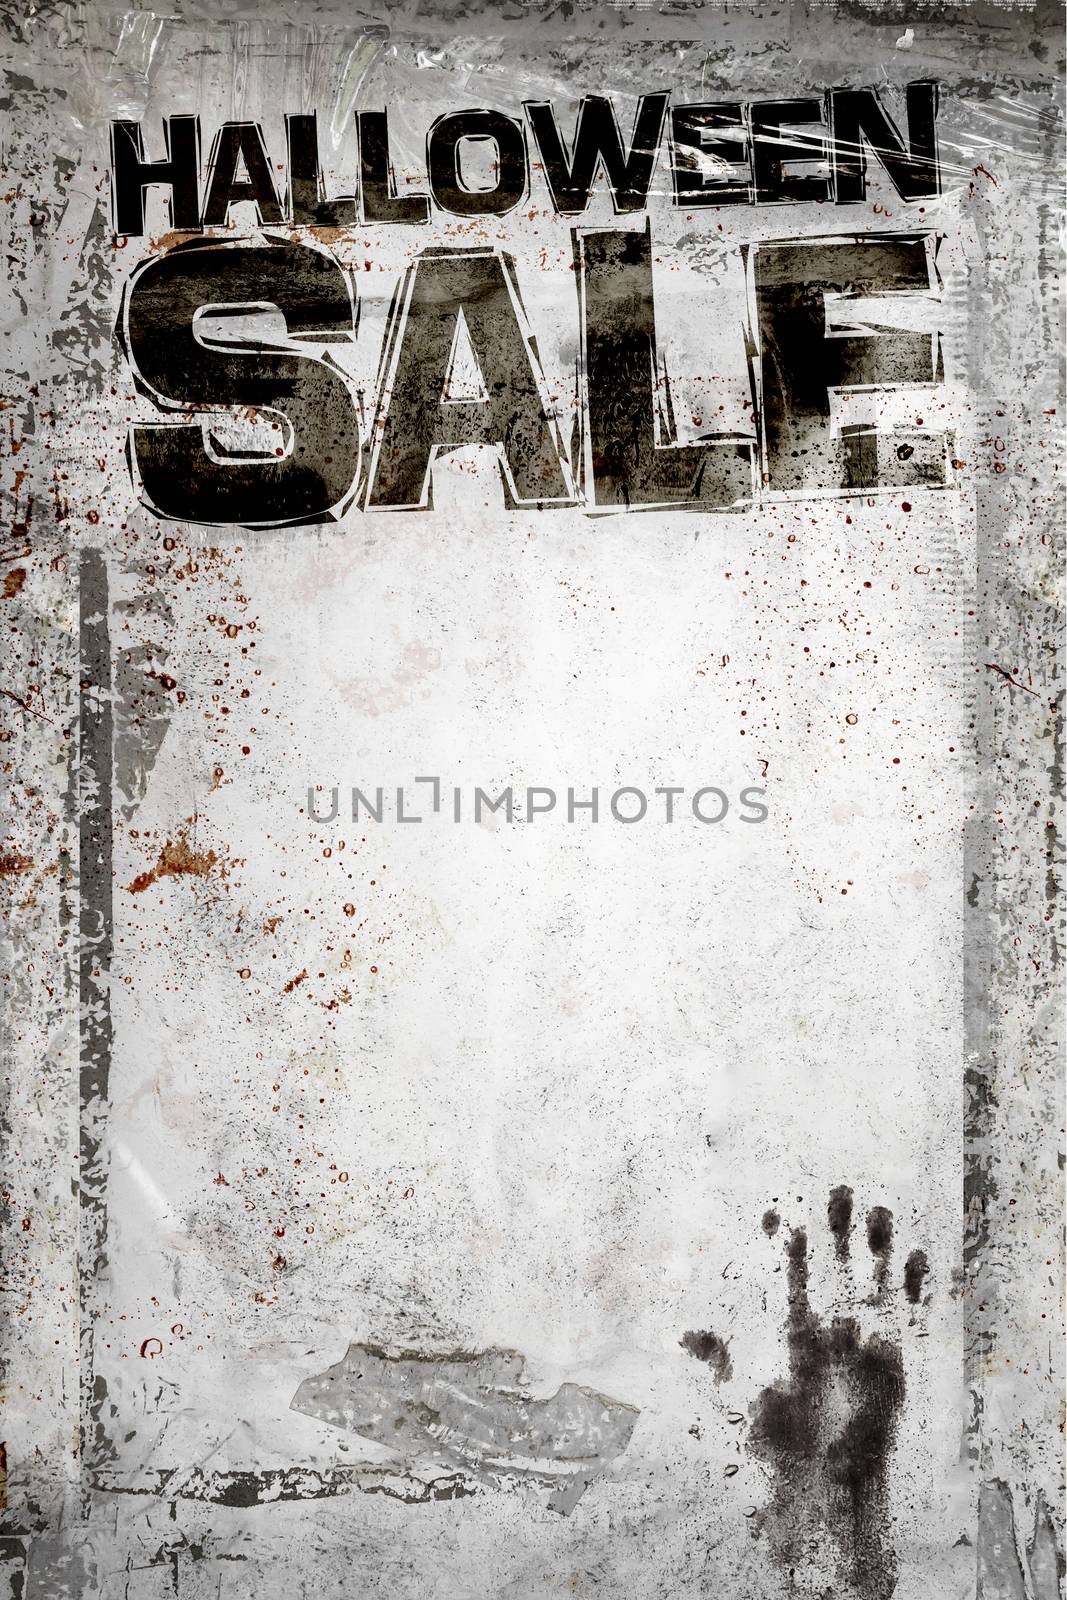 Halloween sale background with grungy frame, bloody handprints, remains of scotch tape and cellophane. Fully editable. It can be used as a party invitation, food menu, poster, wallpaper, design t-shirts and more.